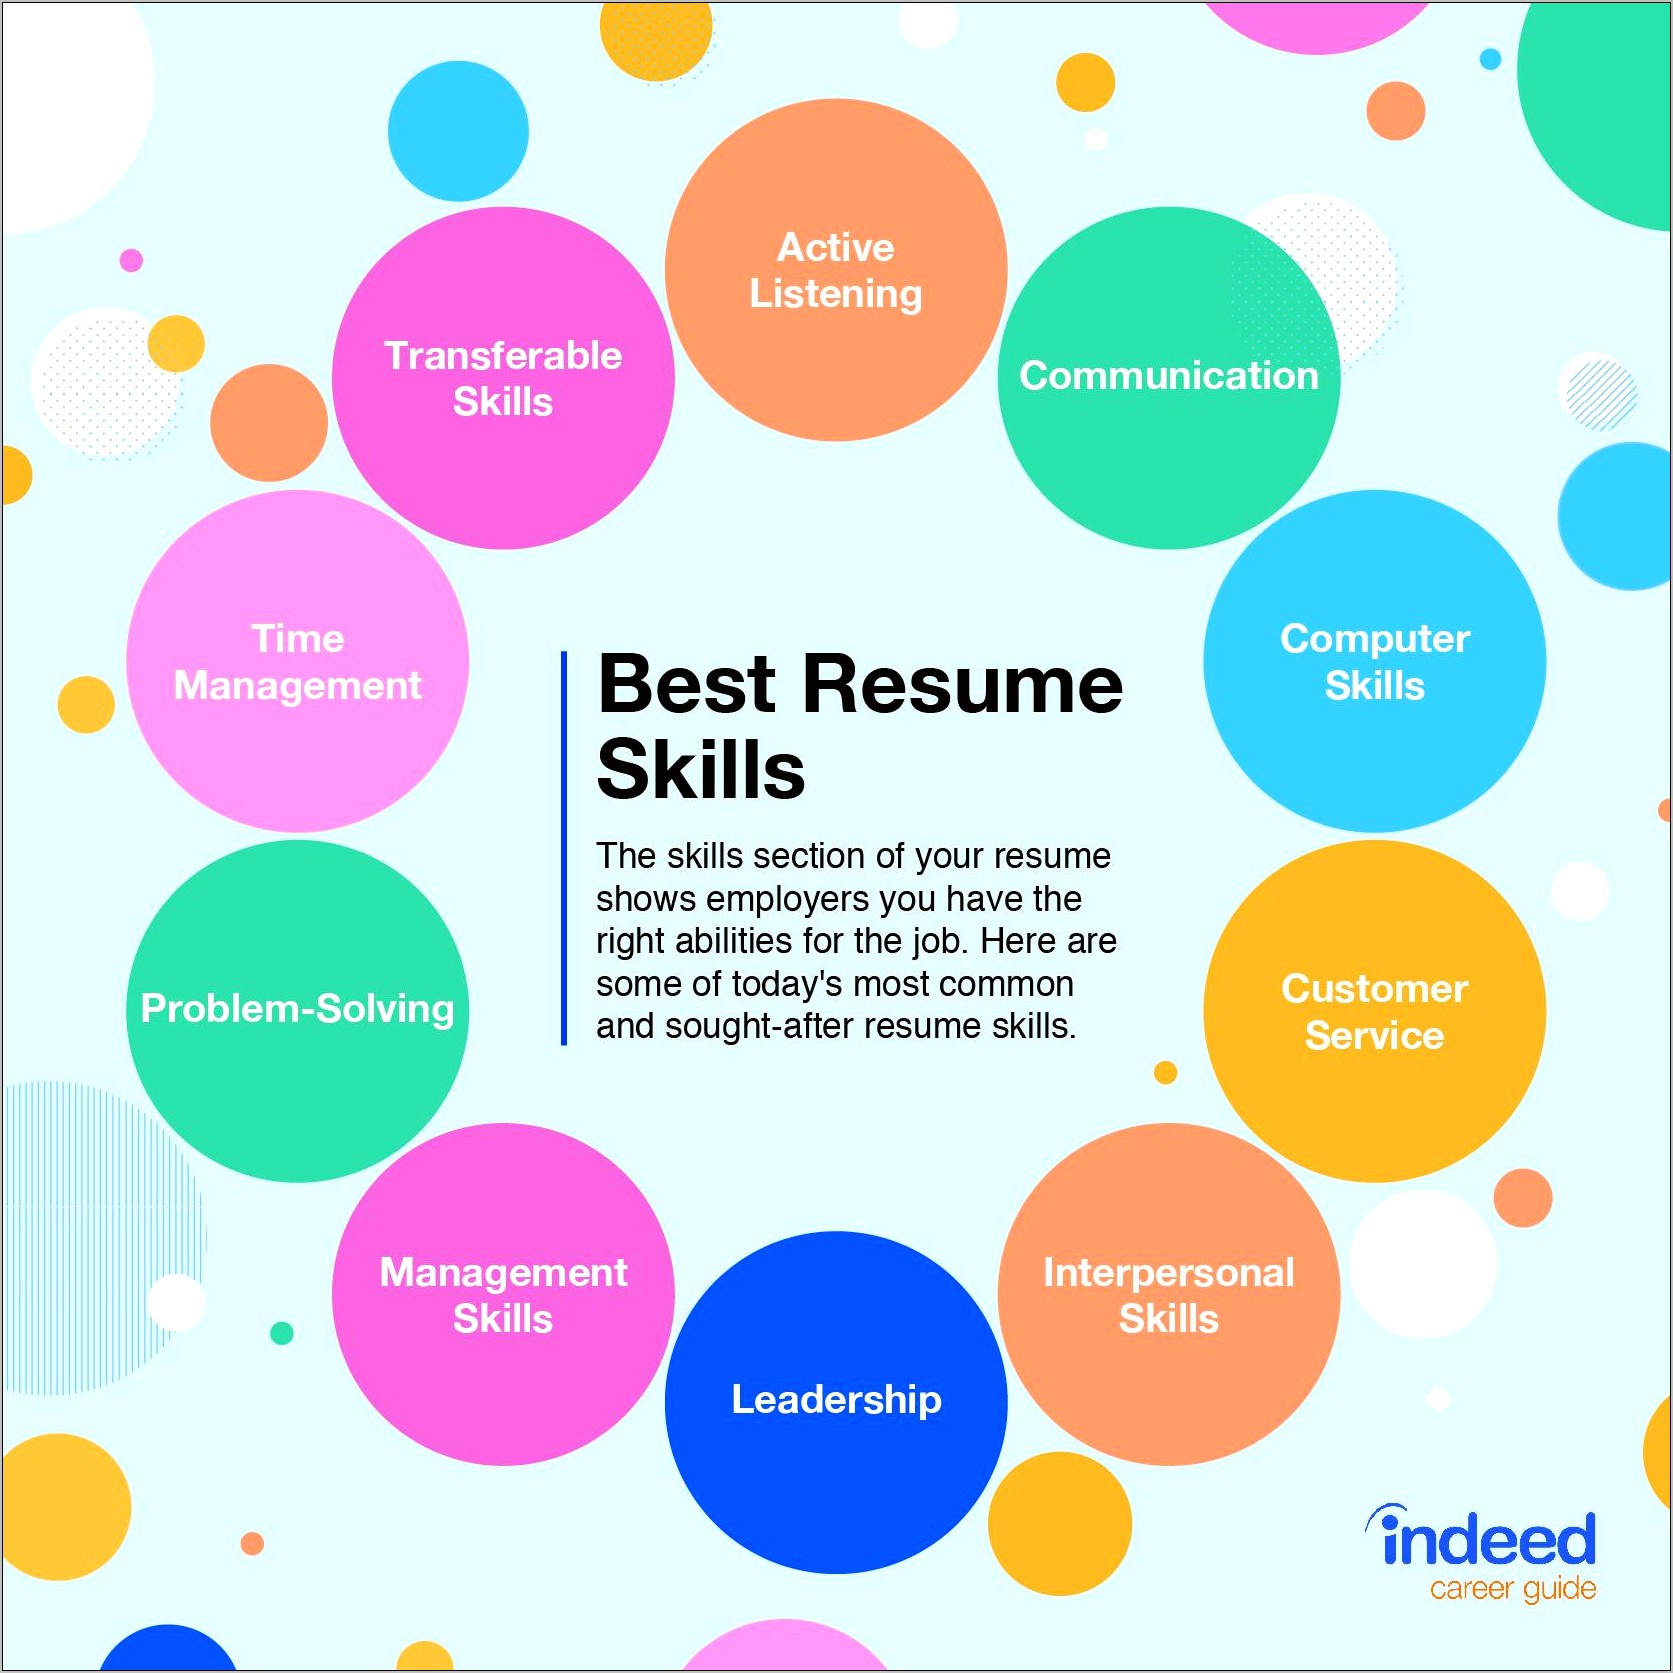 7 Skills To Leave Off Your Resume